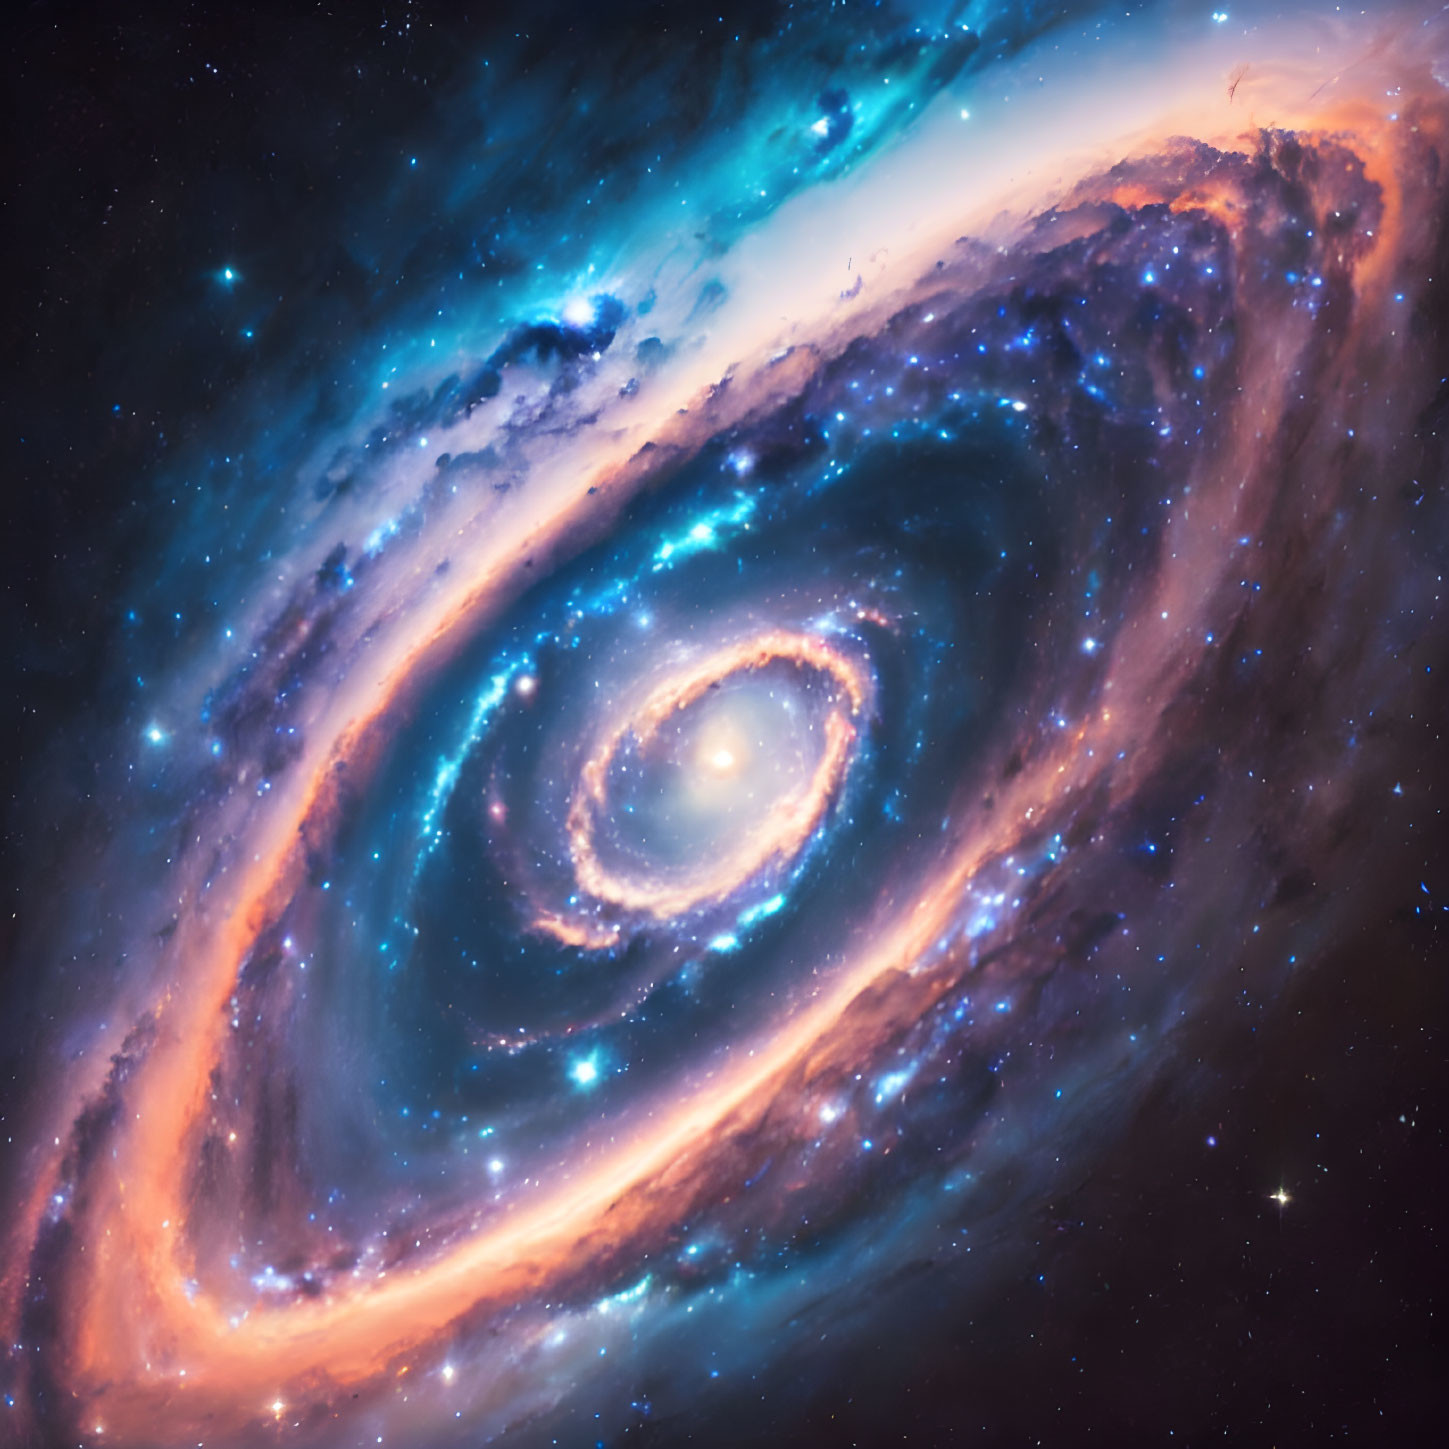 Spiral Galaxy with Swirling Arms and Bright Core in Deep Space